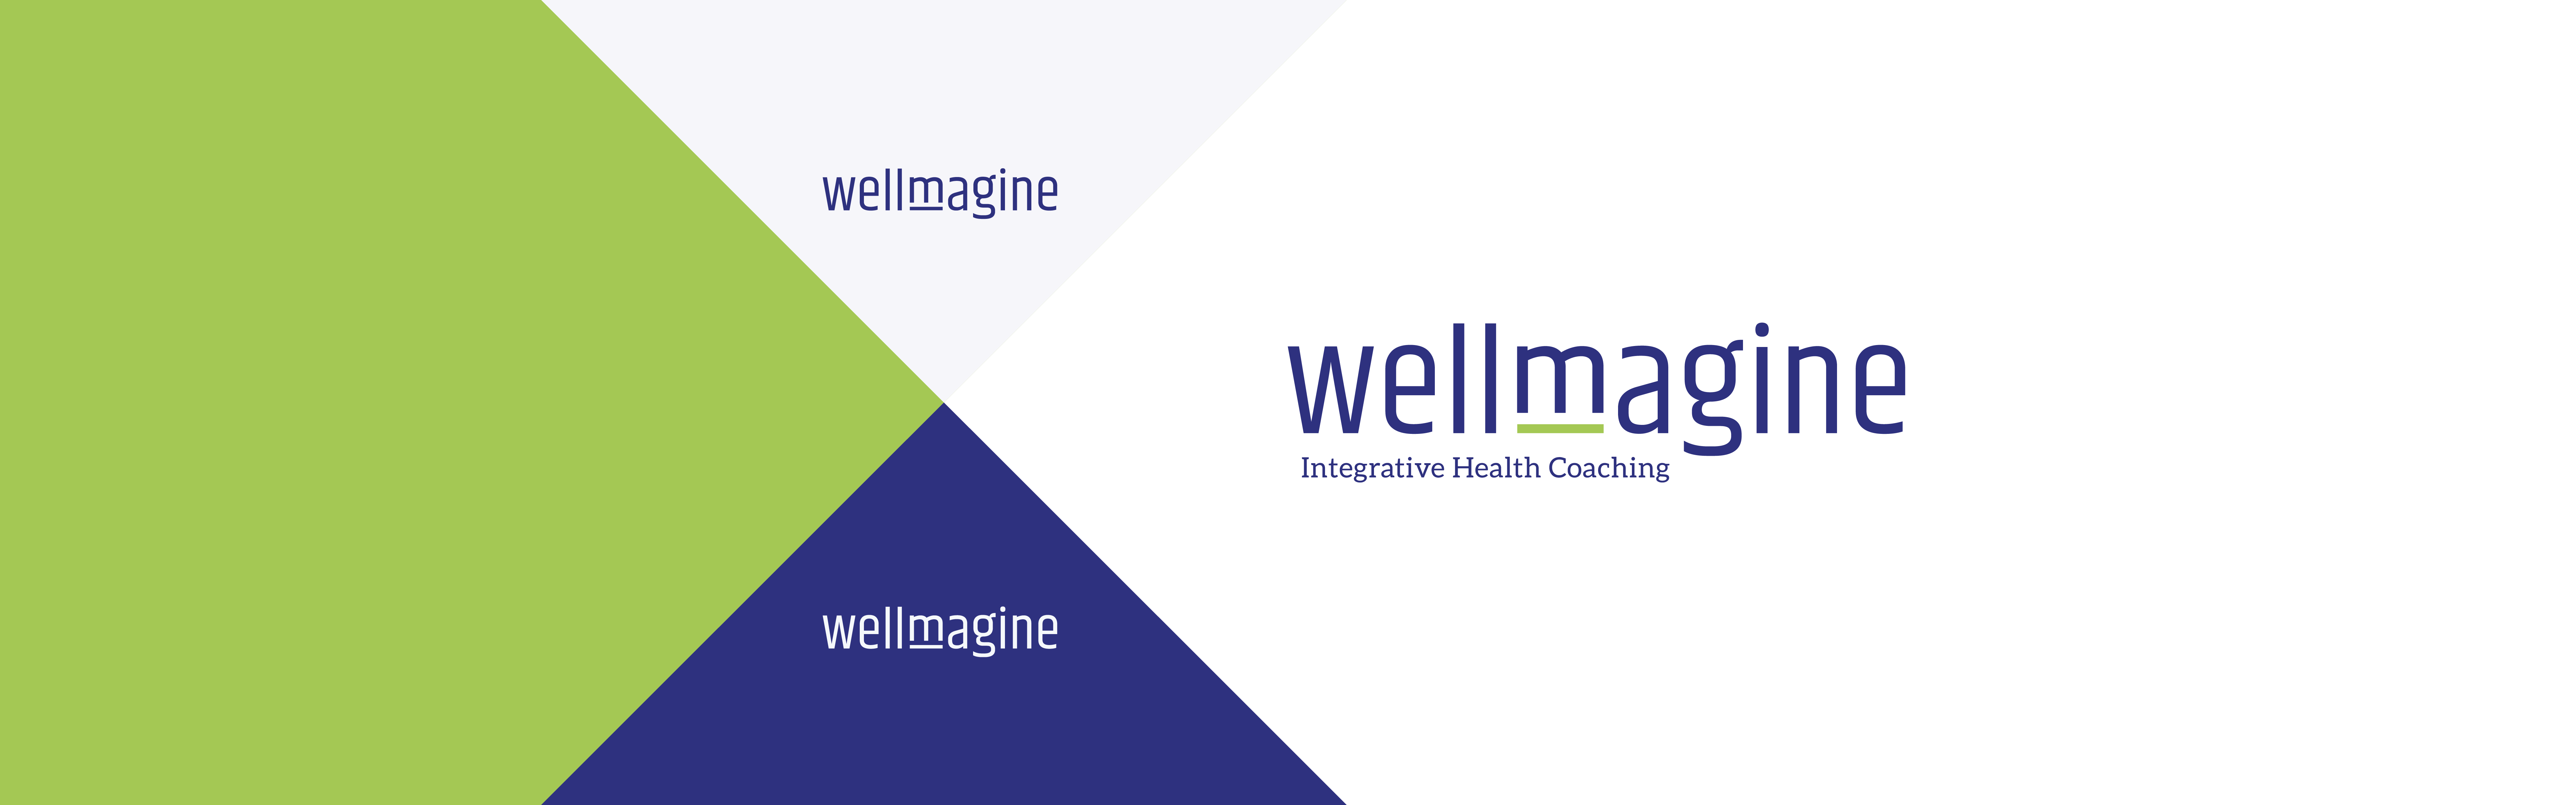 The image features a graphic design with the word "Wellmagine" in different font sizes; on the right, there's a larger version with the subtitle "integrative health coaching," set against a